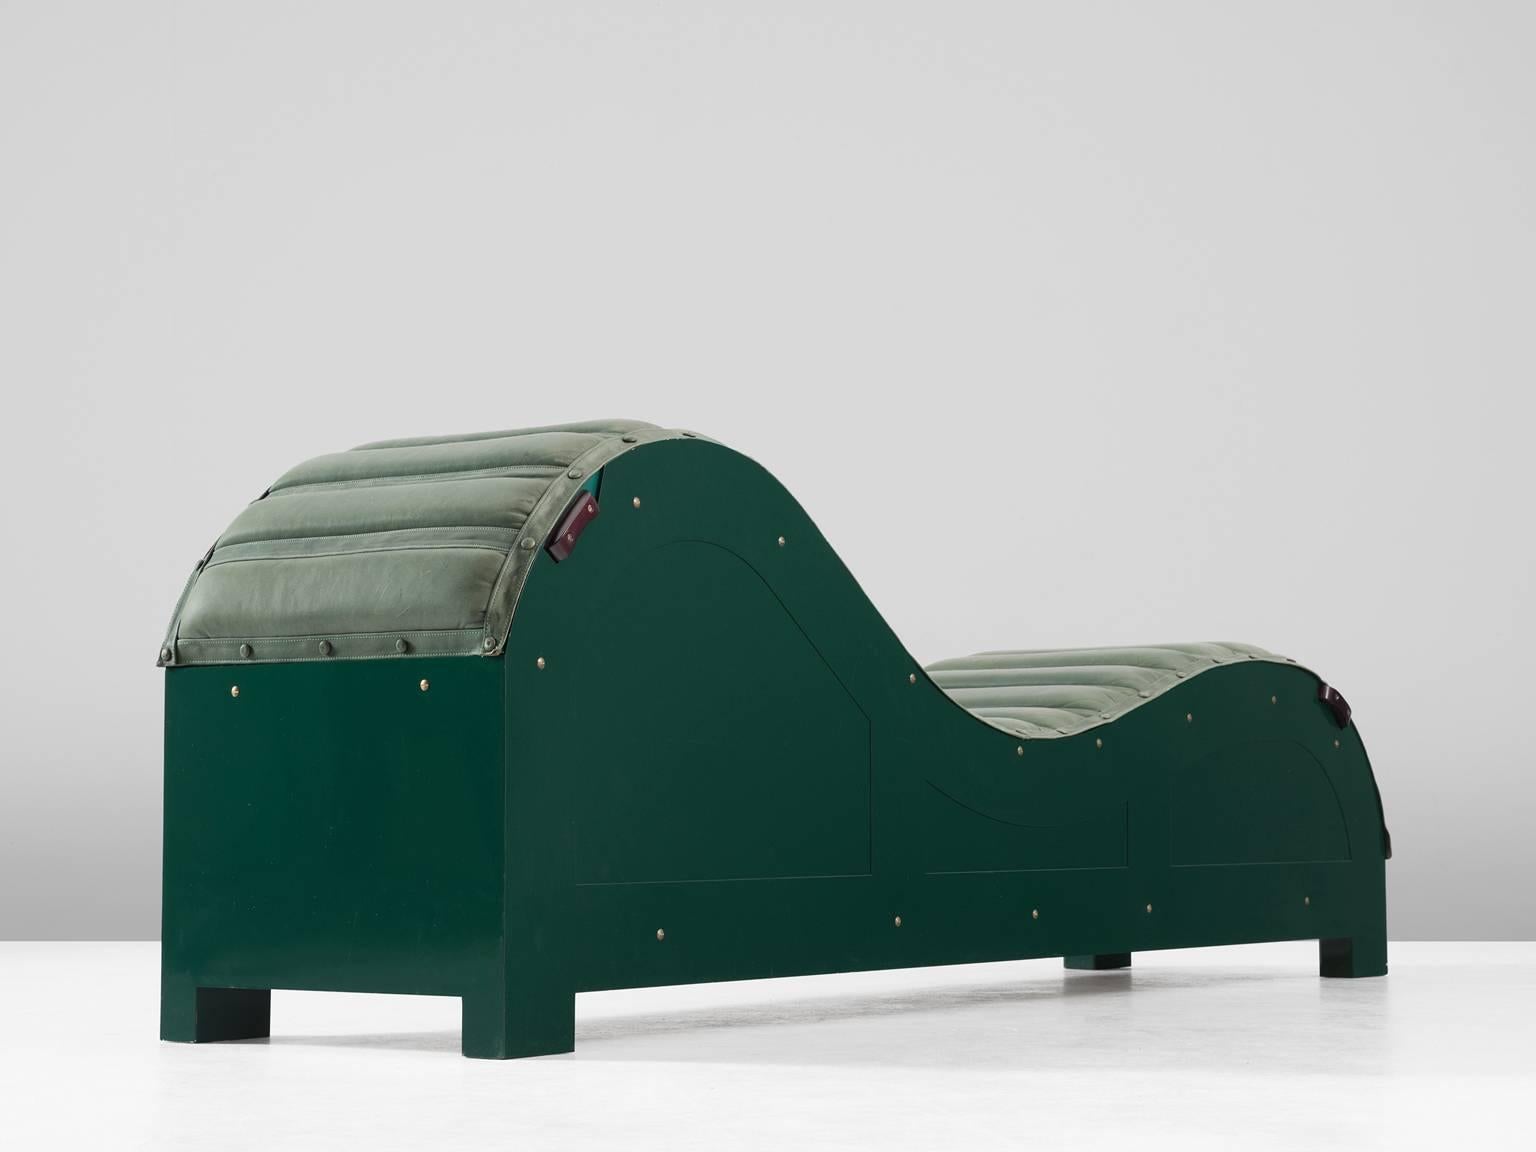 Chaise longue, in steel and leather, by Mats Theselius for Källemo, Sweden 1992. 

Limited edition daybed, number 8 out of 50. This chaise was designed by Mats Theselius. It consist of a steel frame with car-enamel finish in green. The seating is